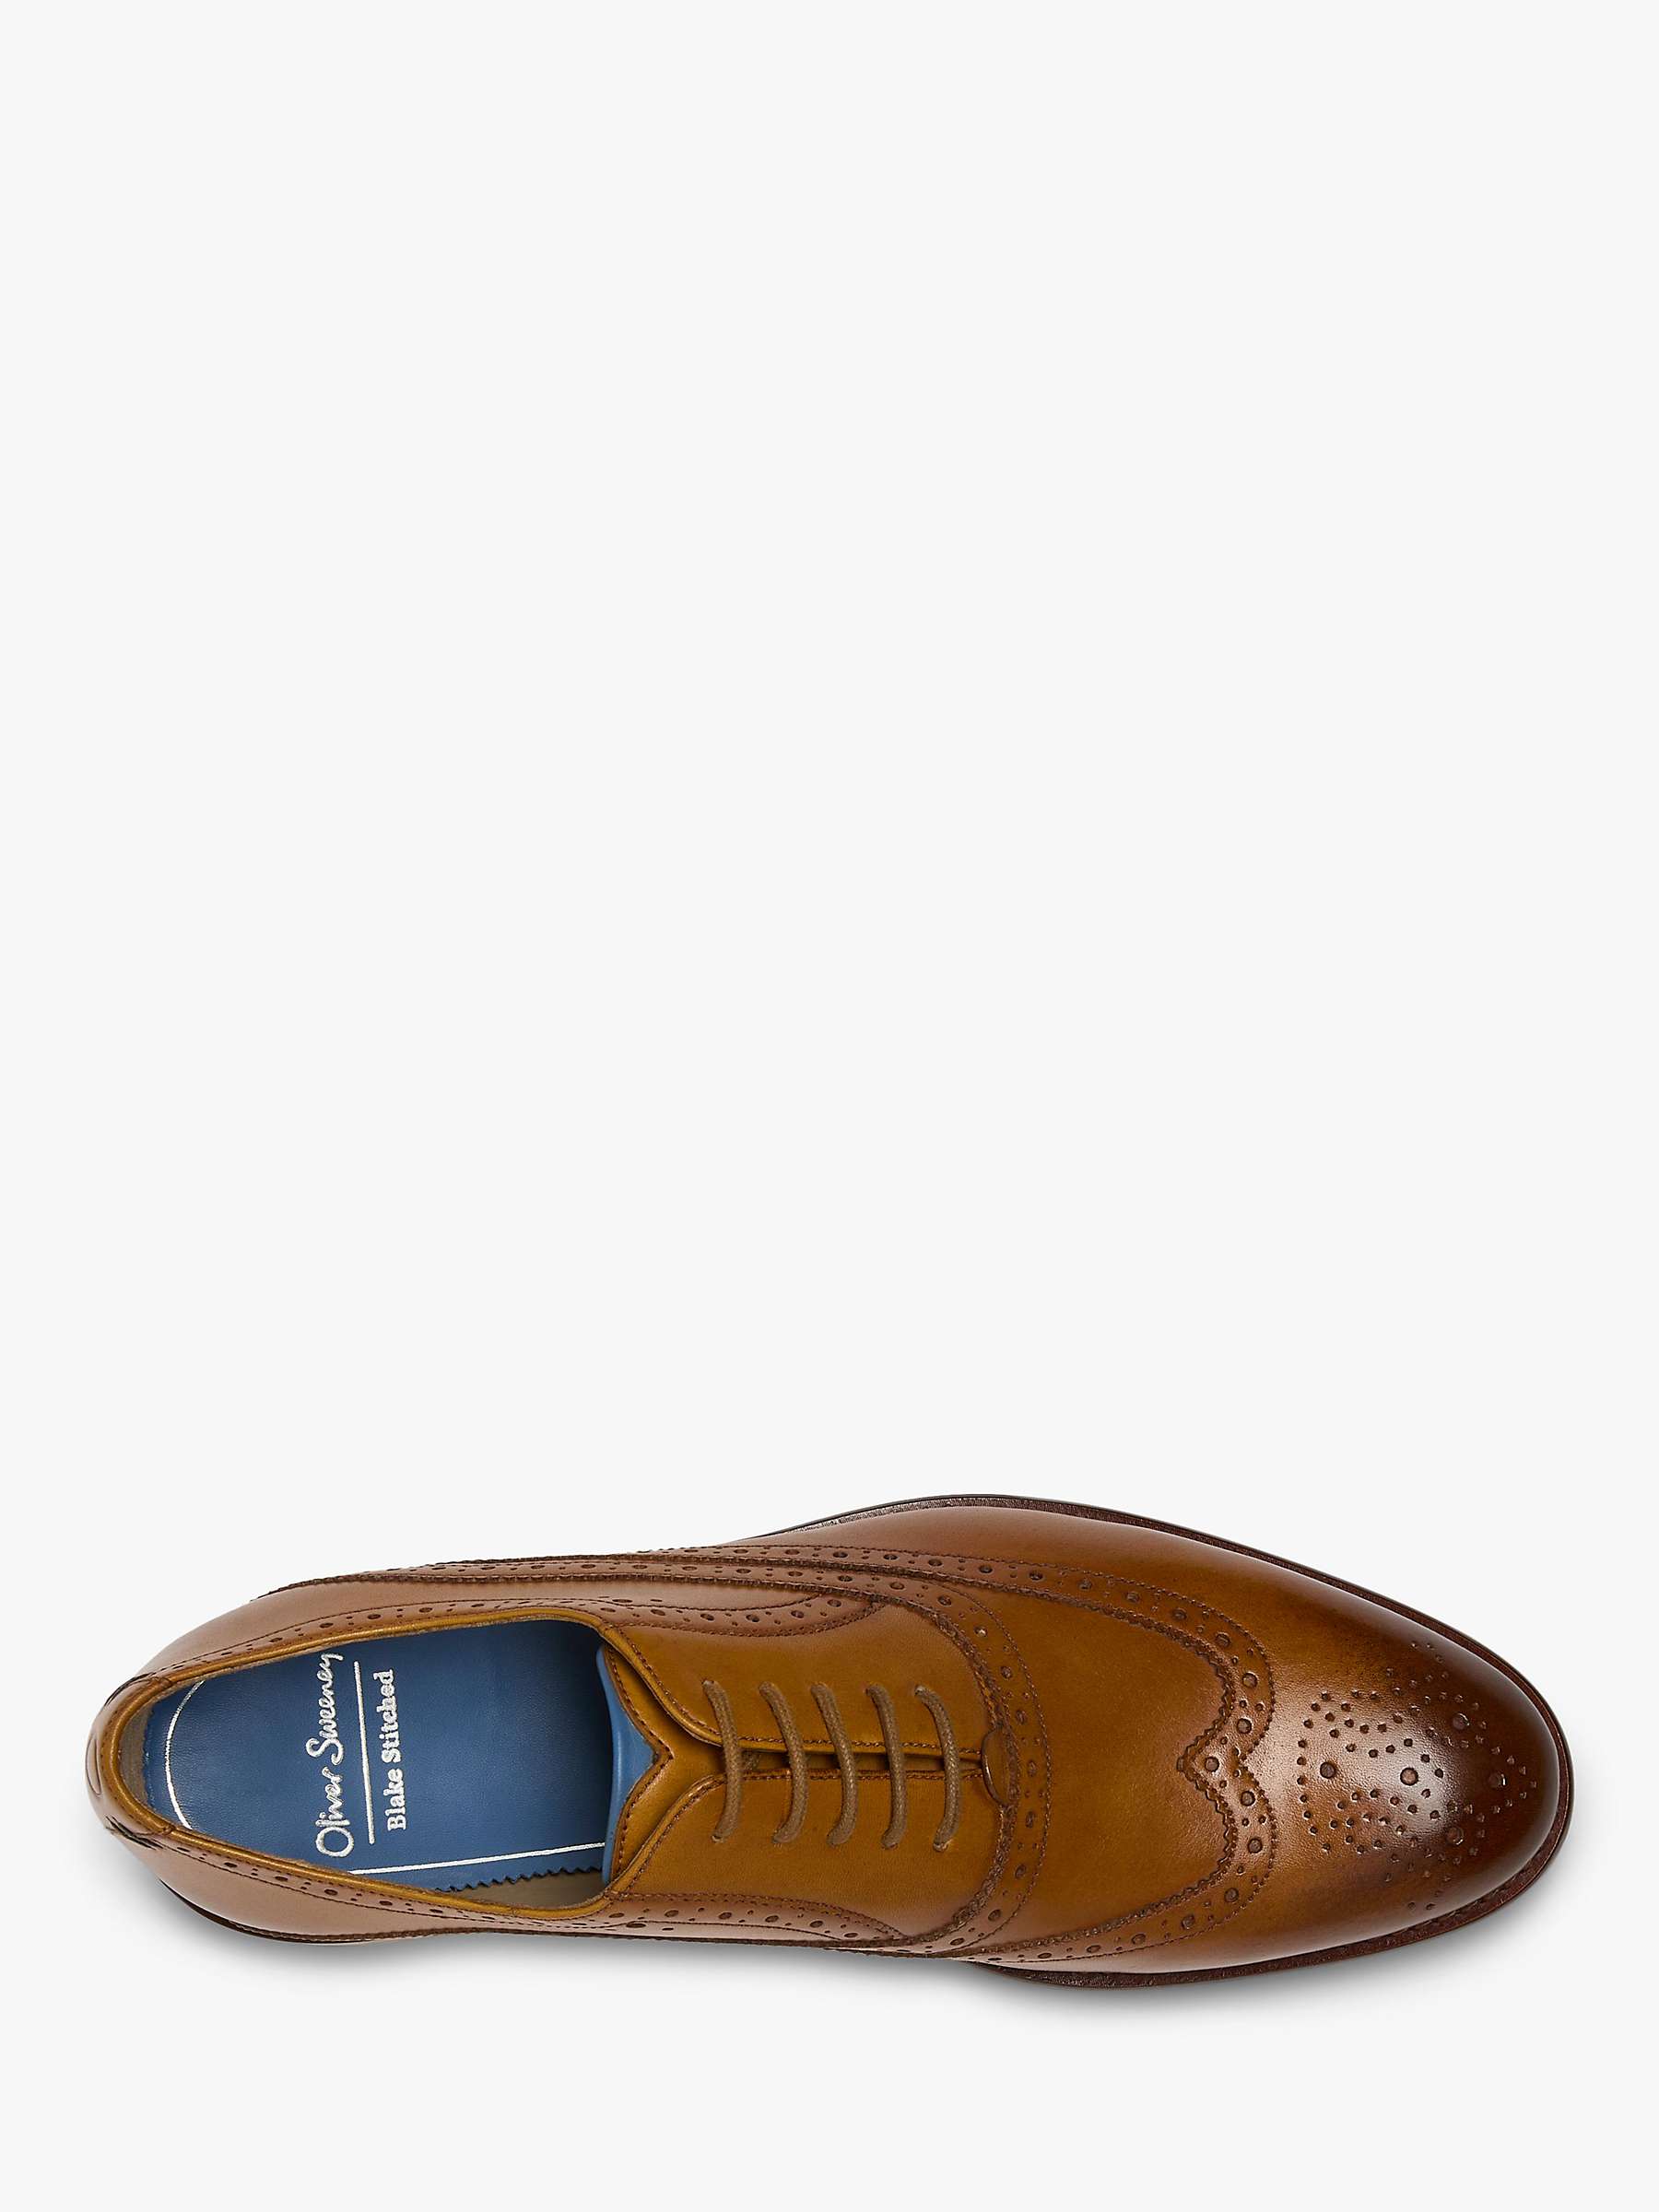 Buy Oliver Sweeney Ledwell Leather Brogues, Light Tan Online at johnlewis.com